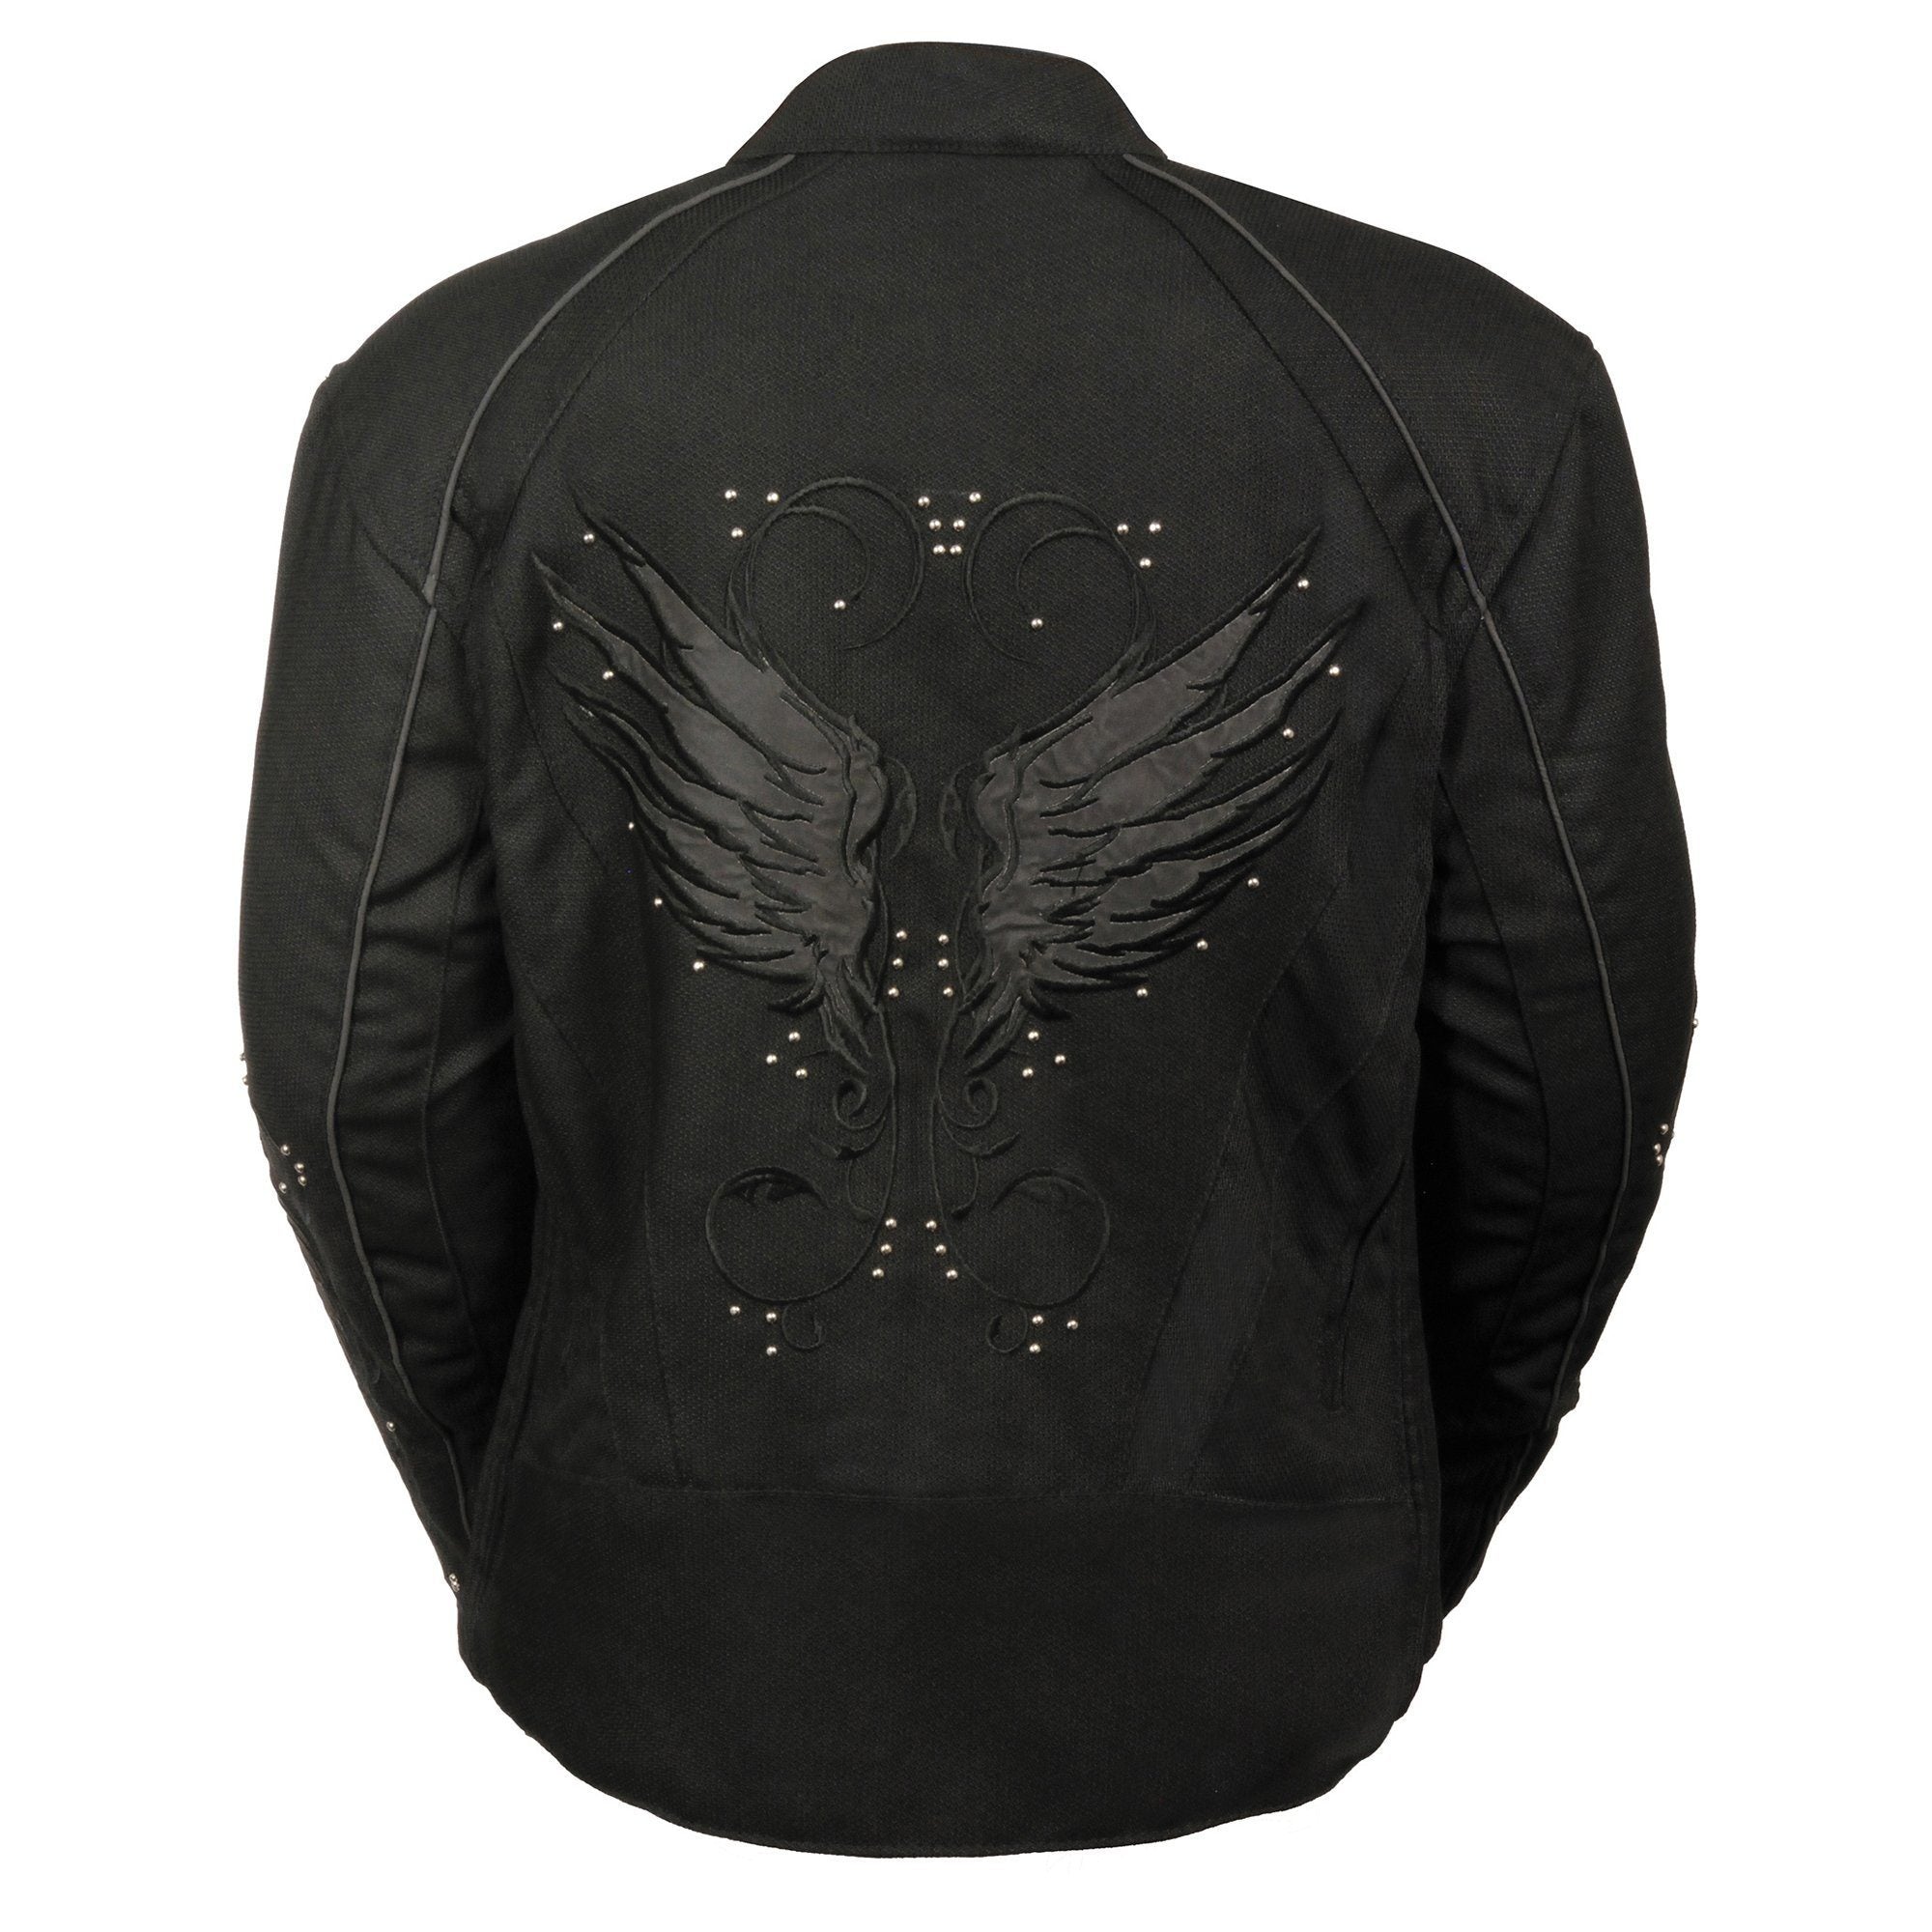 Milwaukee Performance SH1954 Women's Black Textile Jacket with Stud and Wings Detailing - Milwaukee Performance Womens Textile Jackets